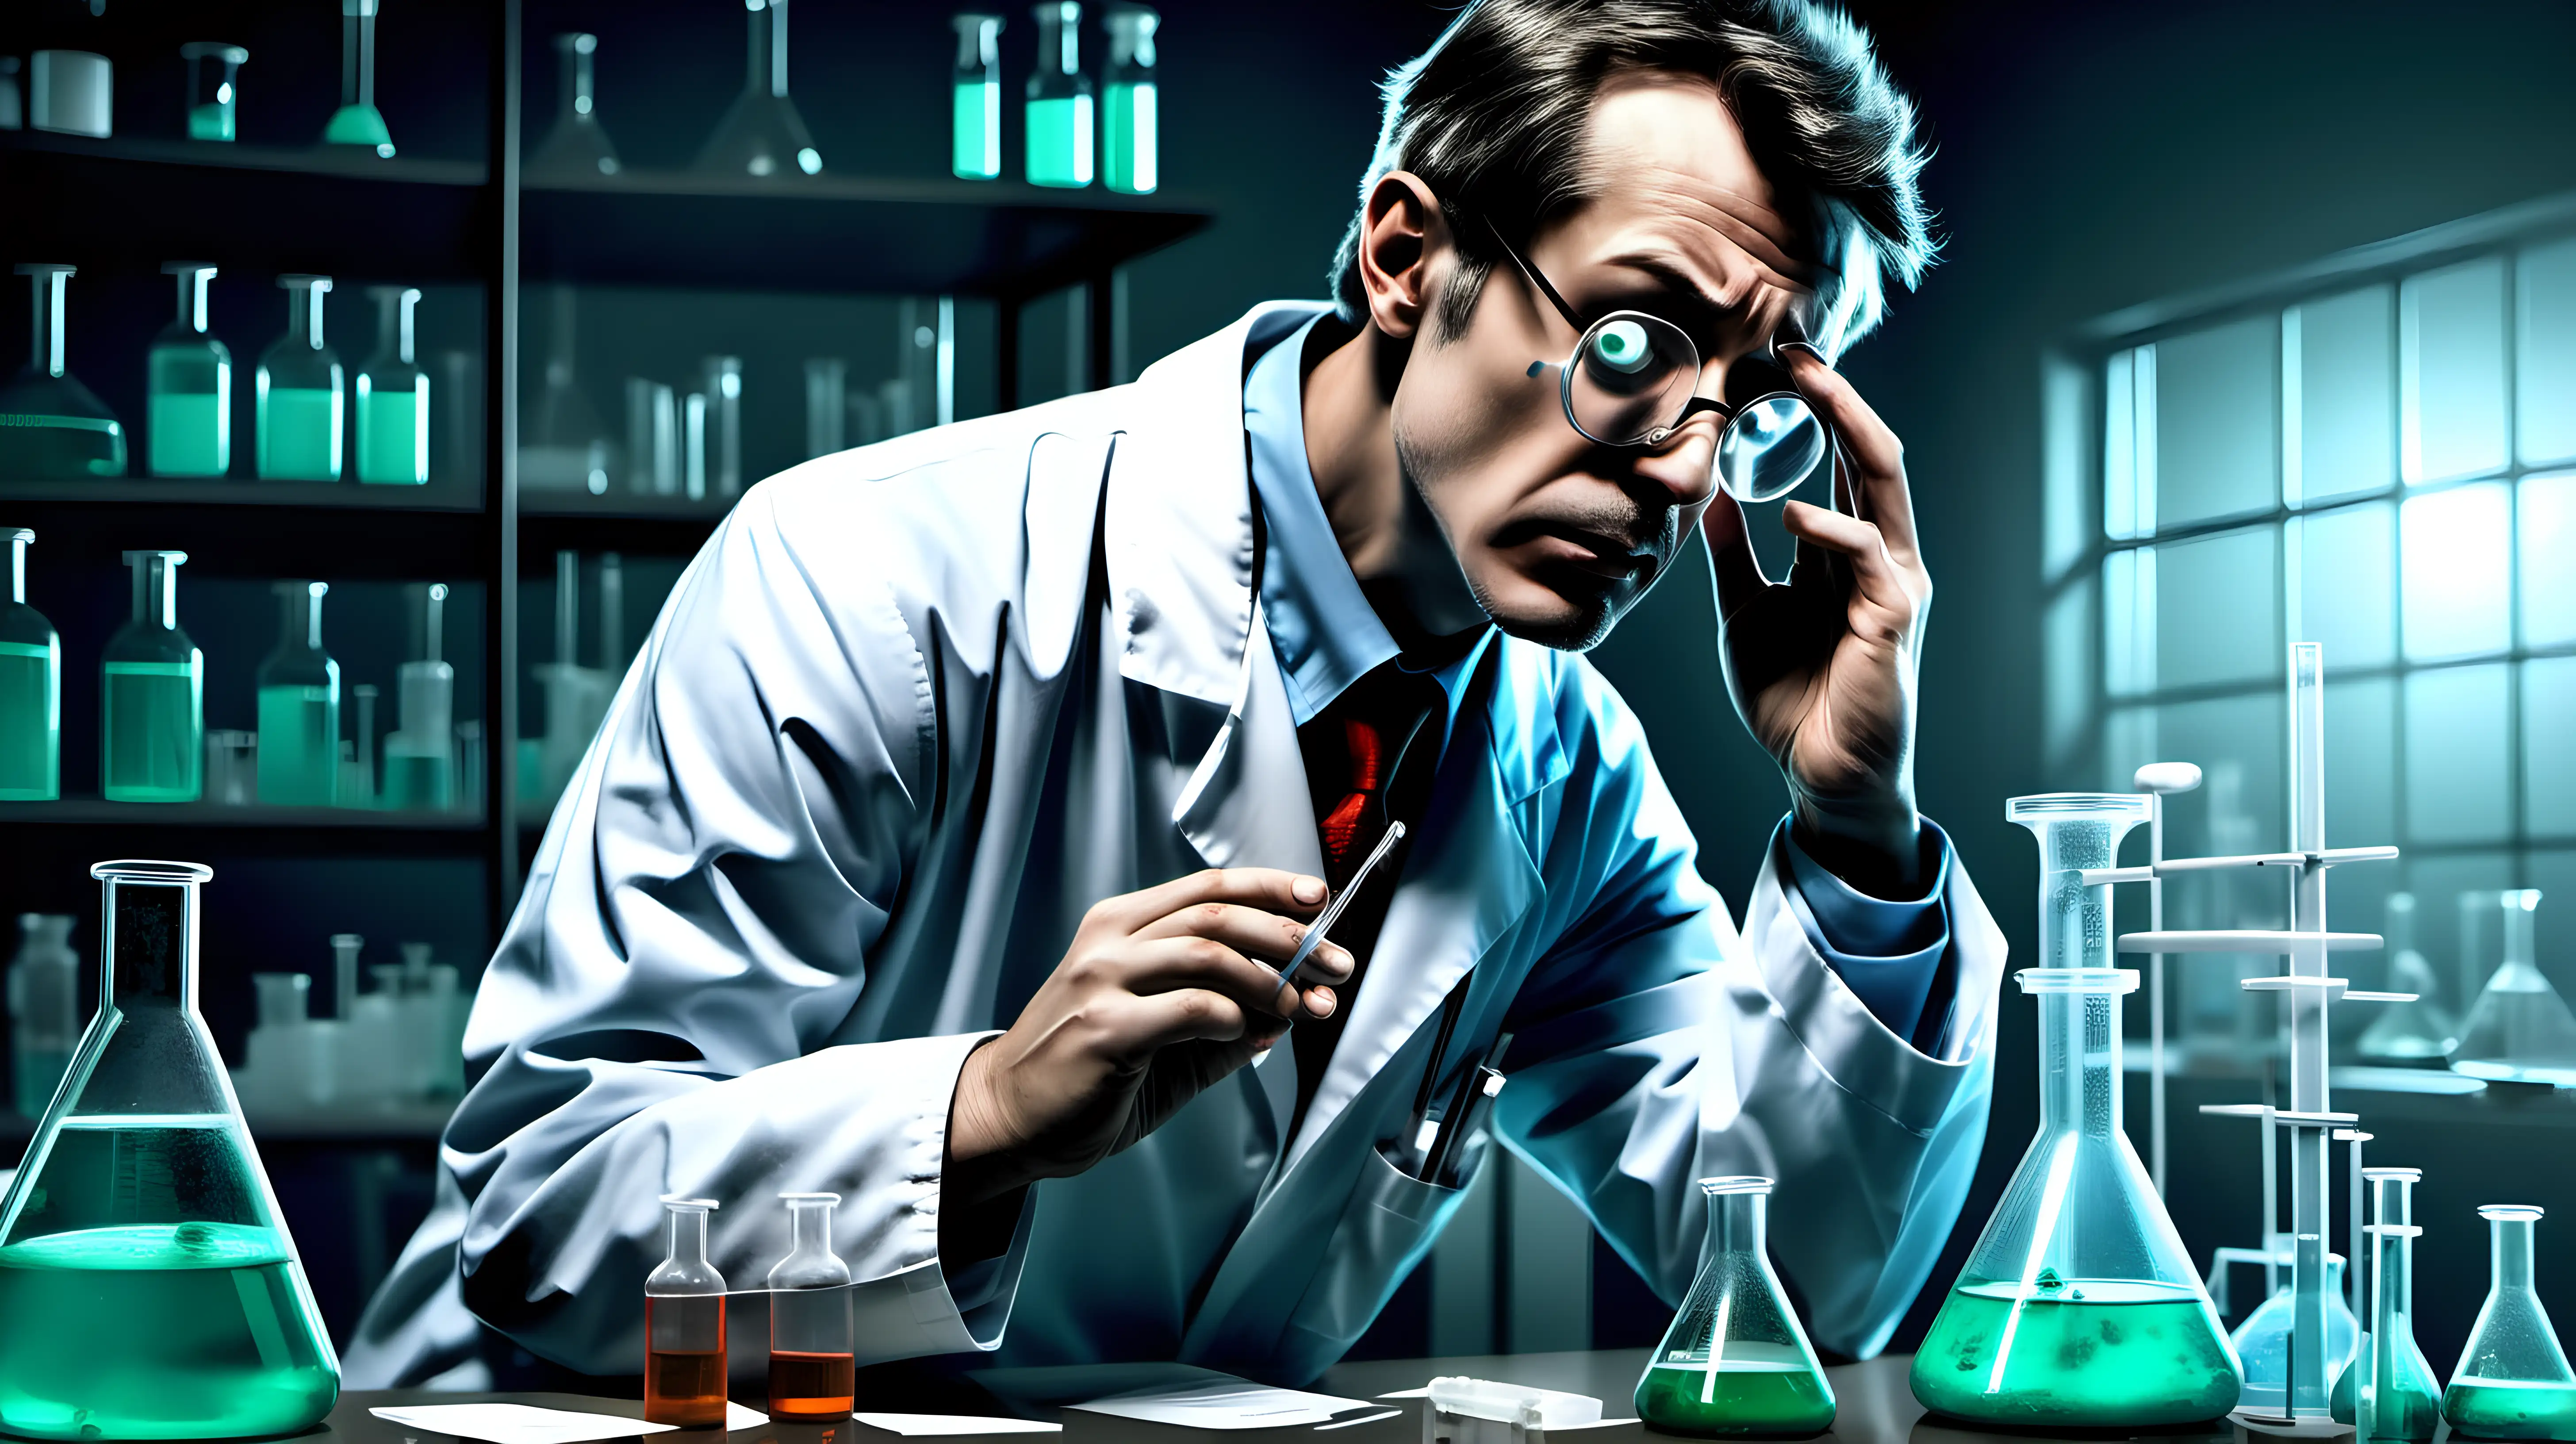 Illustrate a scene of a scientist in a lab conducting experiments, wearing a lab coat and showing signs of exhaustion, emphasizing the rigorous and demanding nature of scientific research.